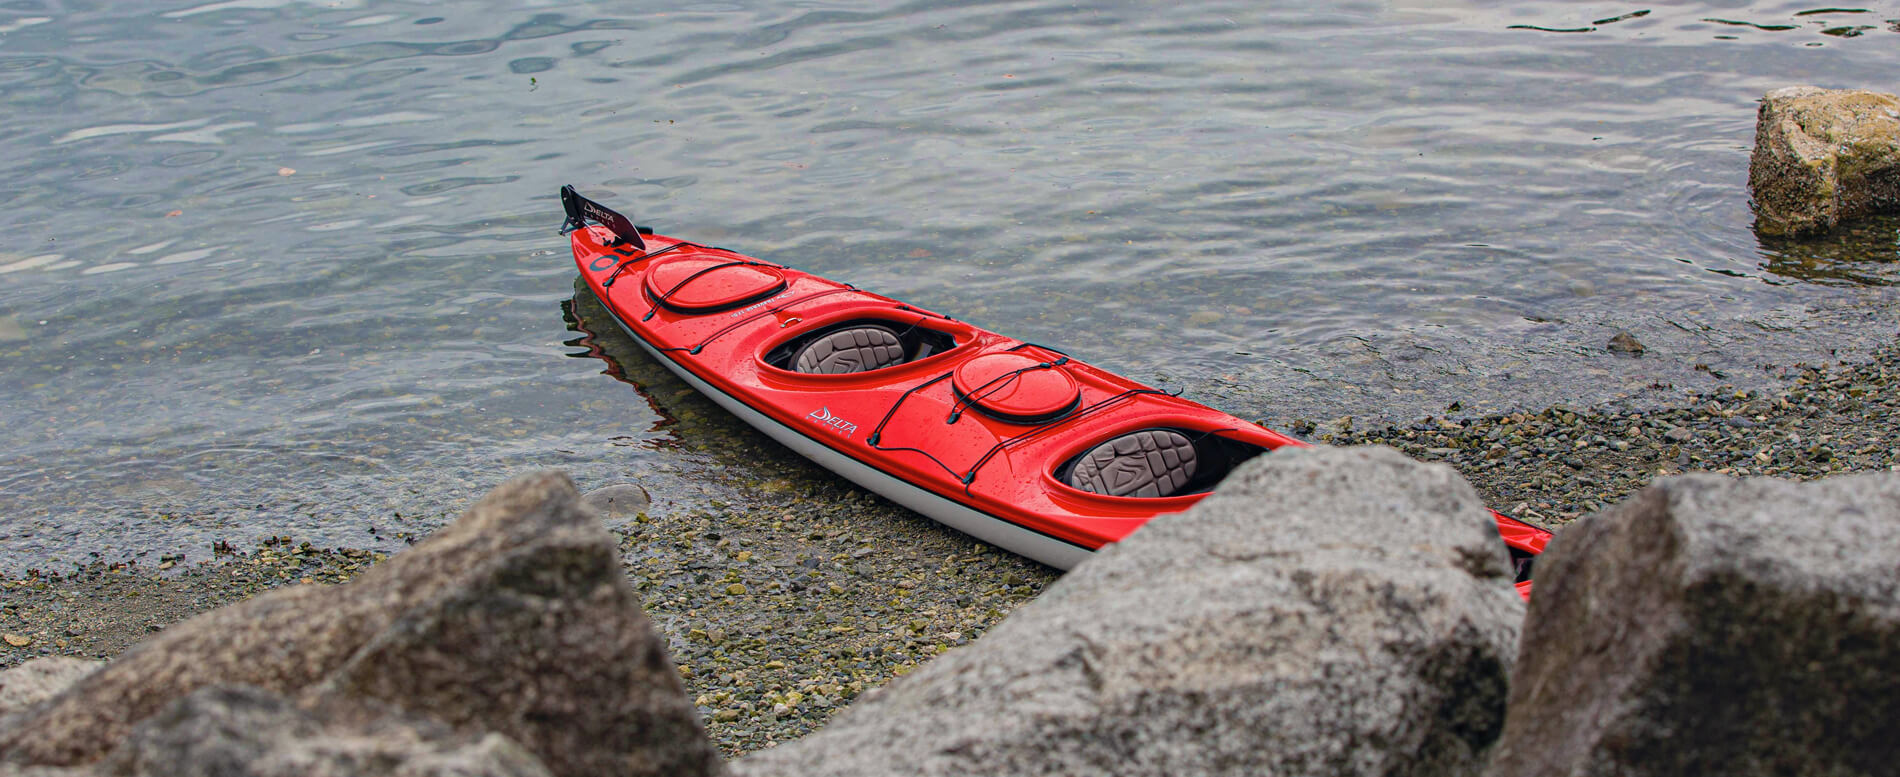 The Ultimate Guide to Buying a Tandem Kayak